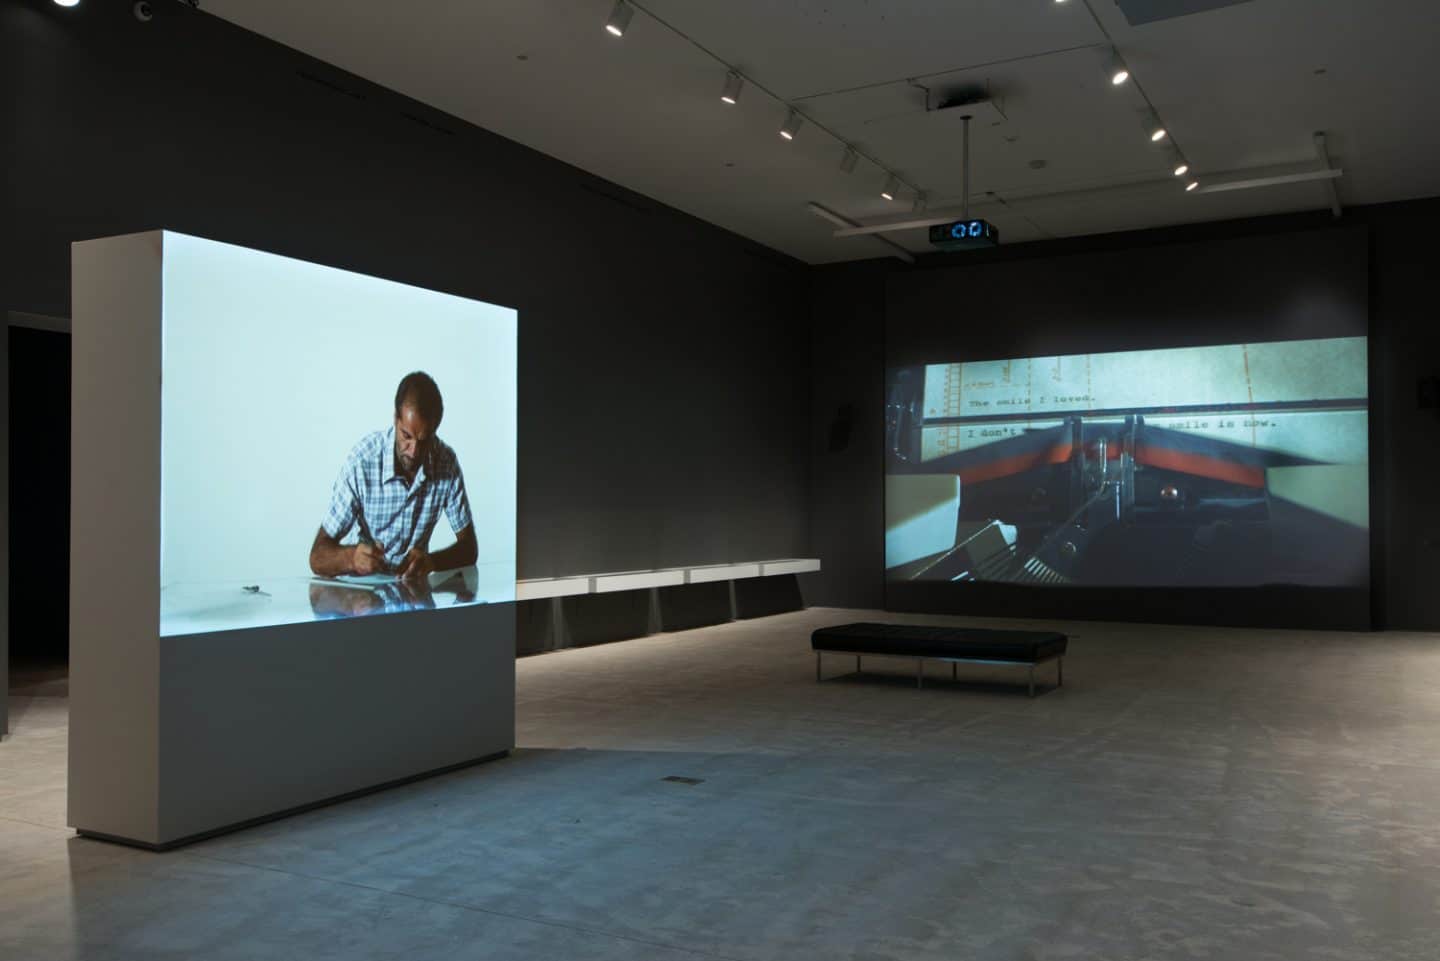 Installation view of All is Well. Photo: Paul Litherland